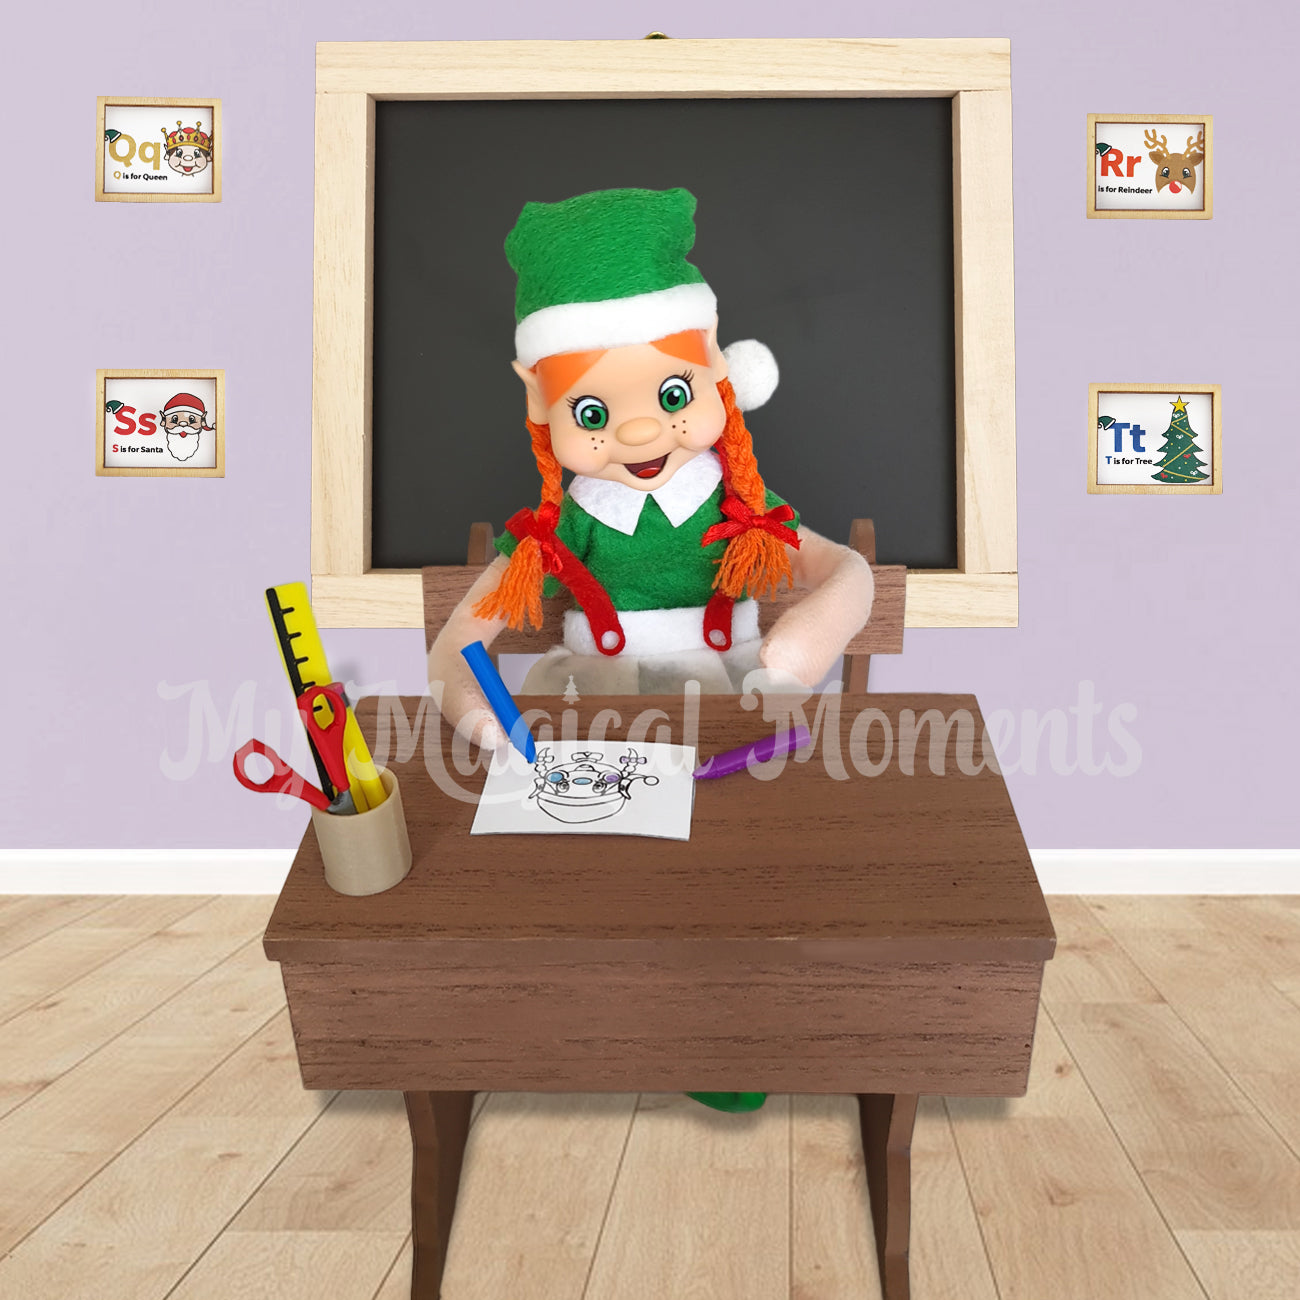 Orange Haired Elf colouring on miniature school desk with a crayon. Stationery on her desk and chalkboard behind